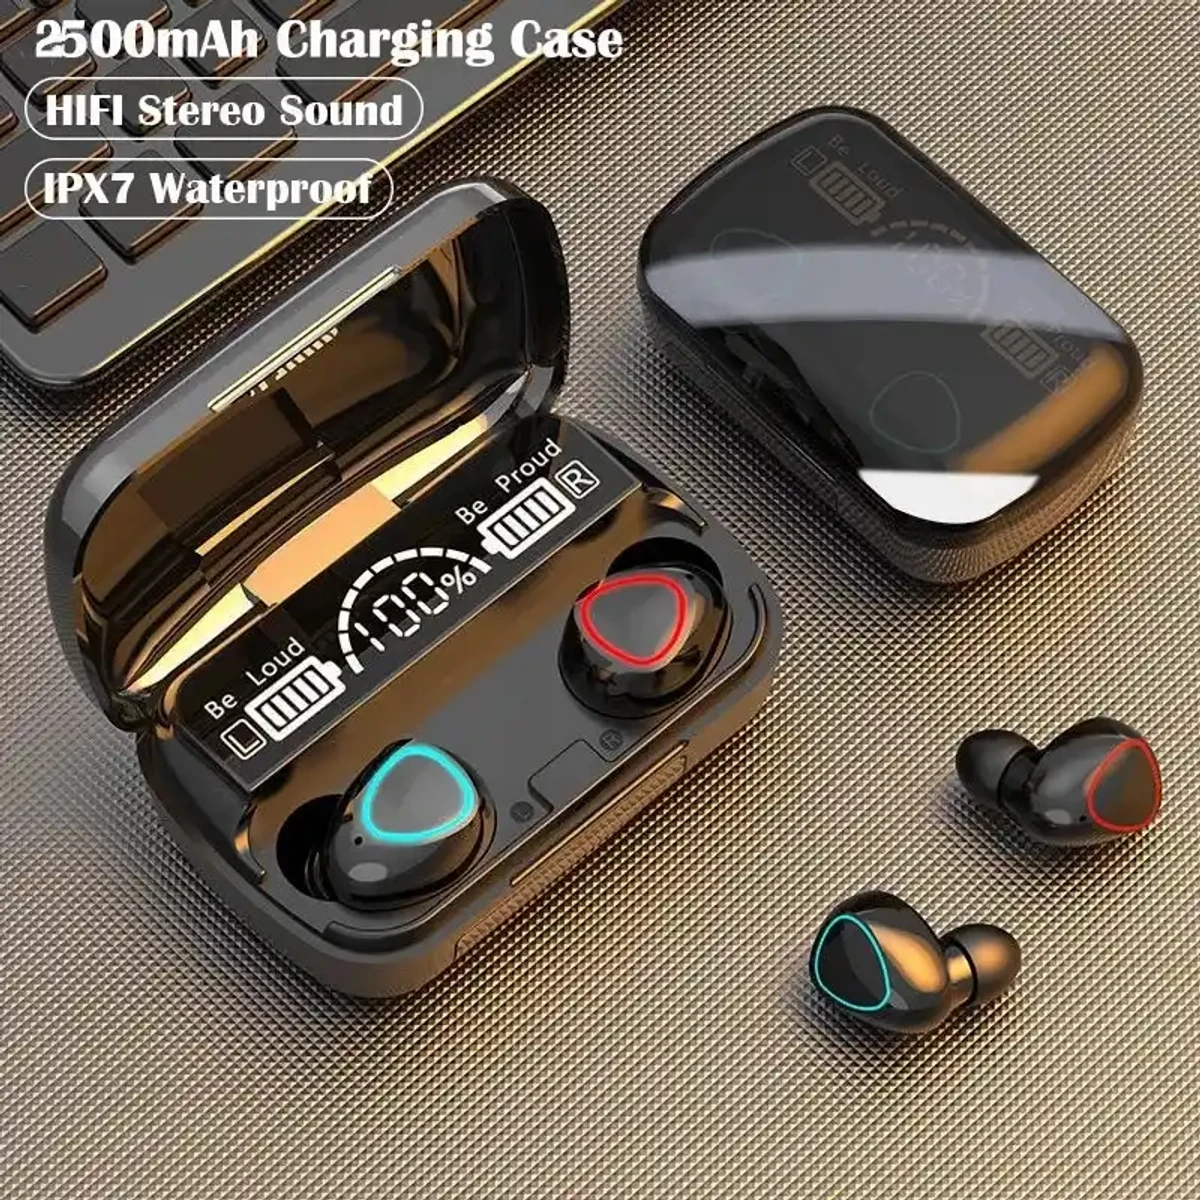 M10 LED HEADPHONE WITH POWER BANK